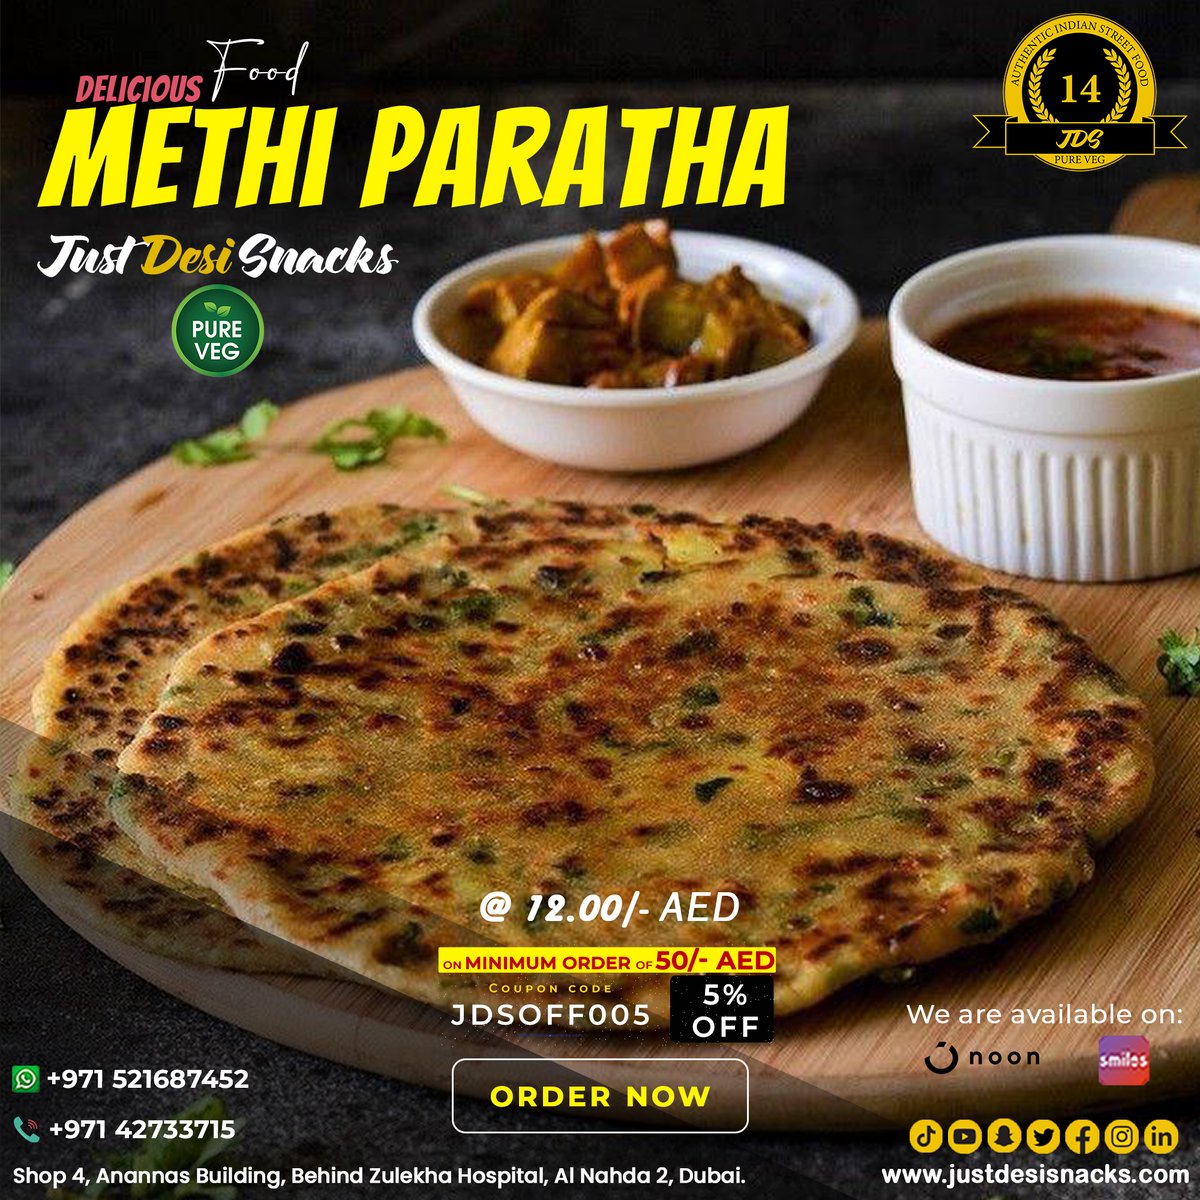 Craving something wholesome?  Try our flavorful Methi Paratha, packed with fenugreek goodness!  A perfect blend of taste and health! 📷📷 Tag a friend who'd love this treat!  #MethiParatha #FlavorfulBites #HealthyDelights
justdesisnacks.com
+971 4273 3715
#justdesisnacks